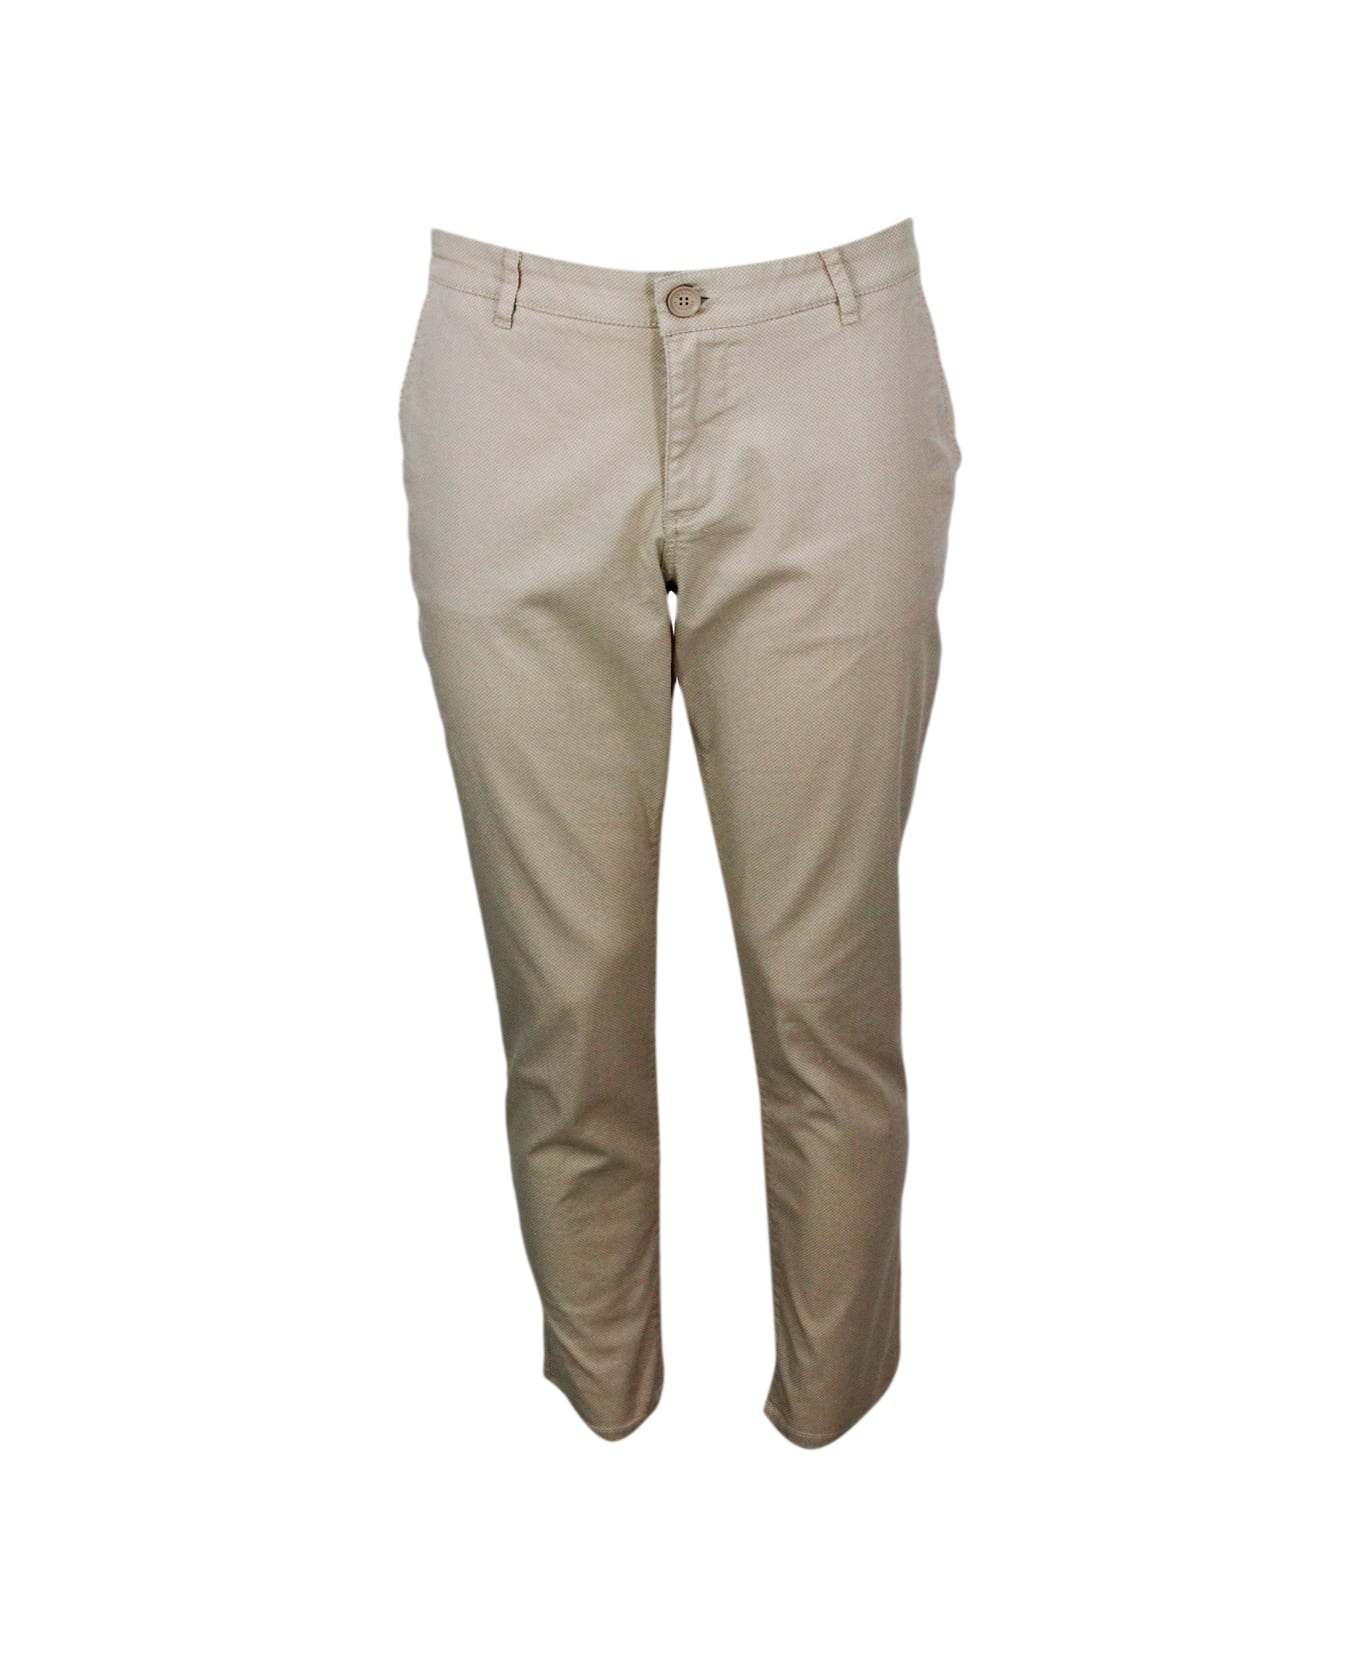 Armani Collezioni Stretch Cotton Trousers With Welt Pockets And Zip And Button Closure - Beige ボトムス